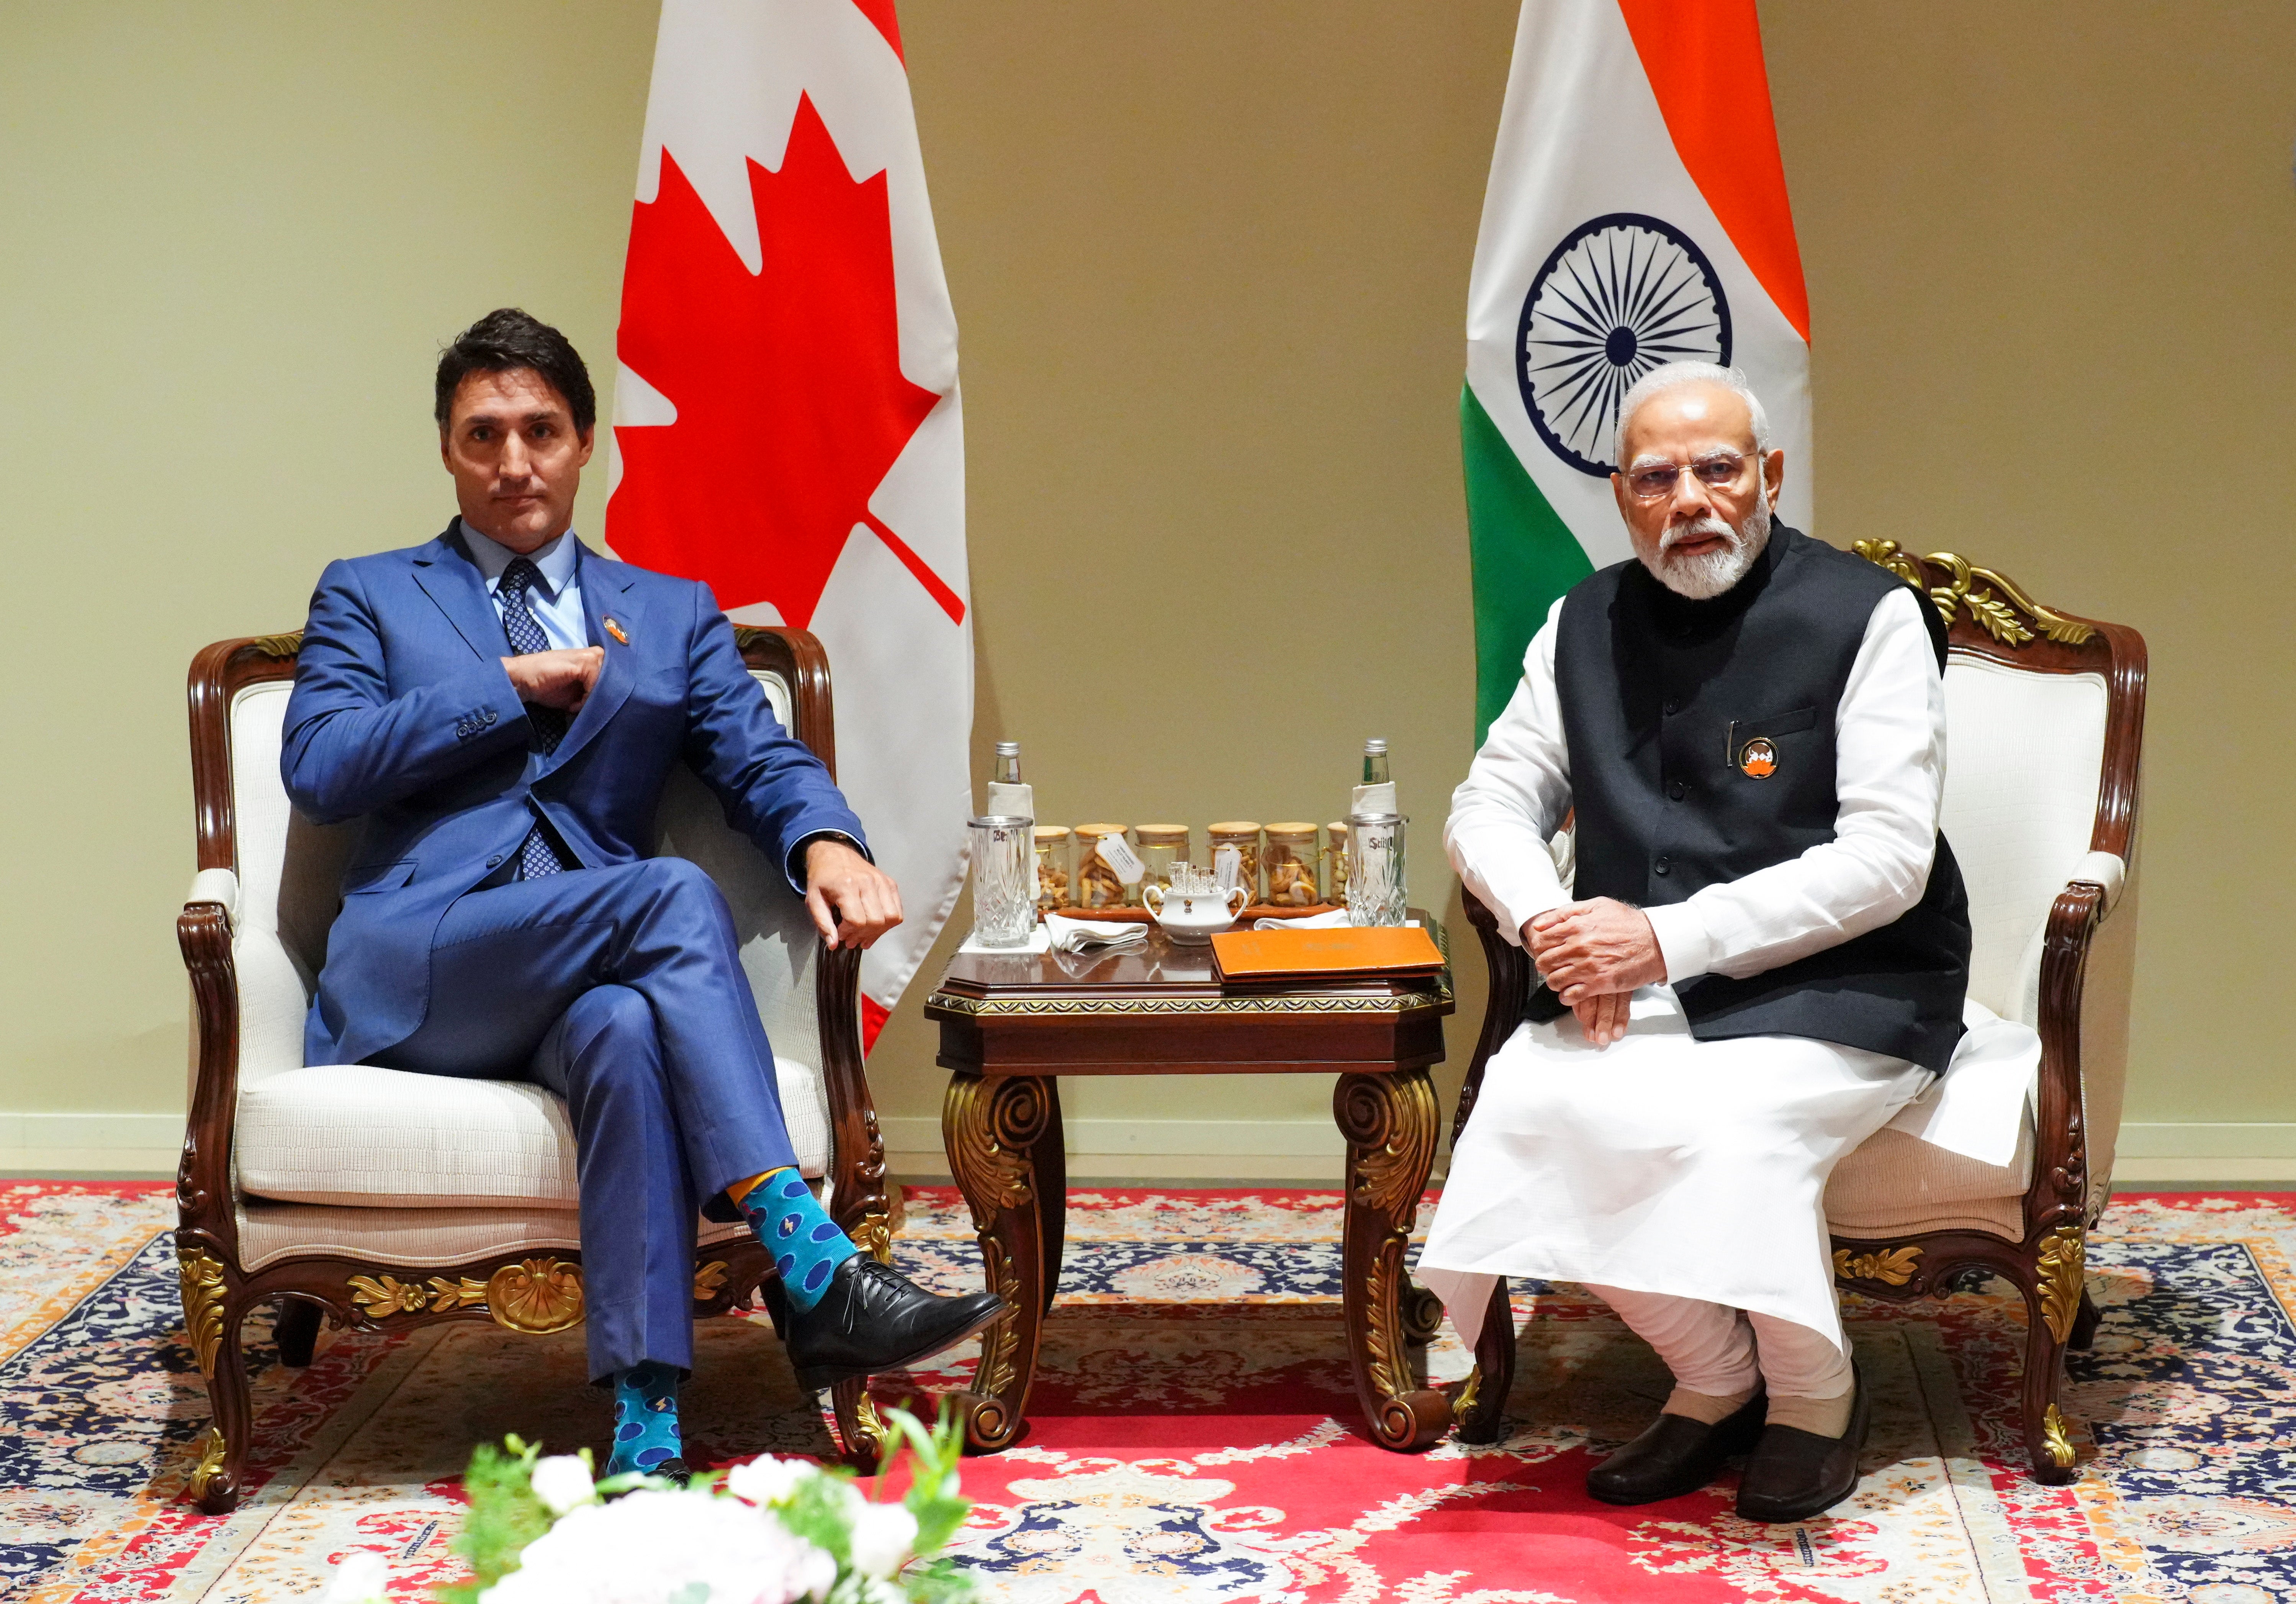 Prime Minister Justin Trudeau takes part in a meeting with Indian Prime Minister Narendra Modi during the G20 Summit